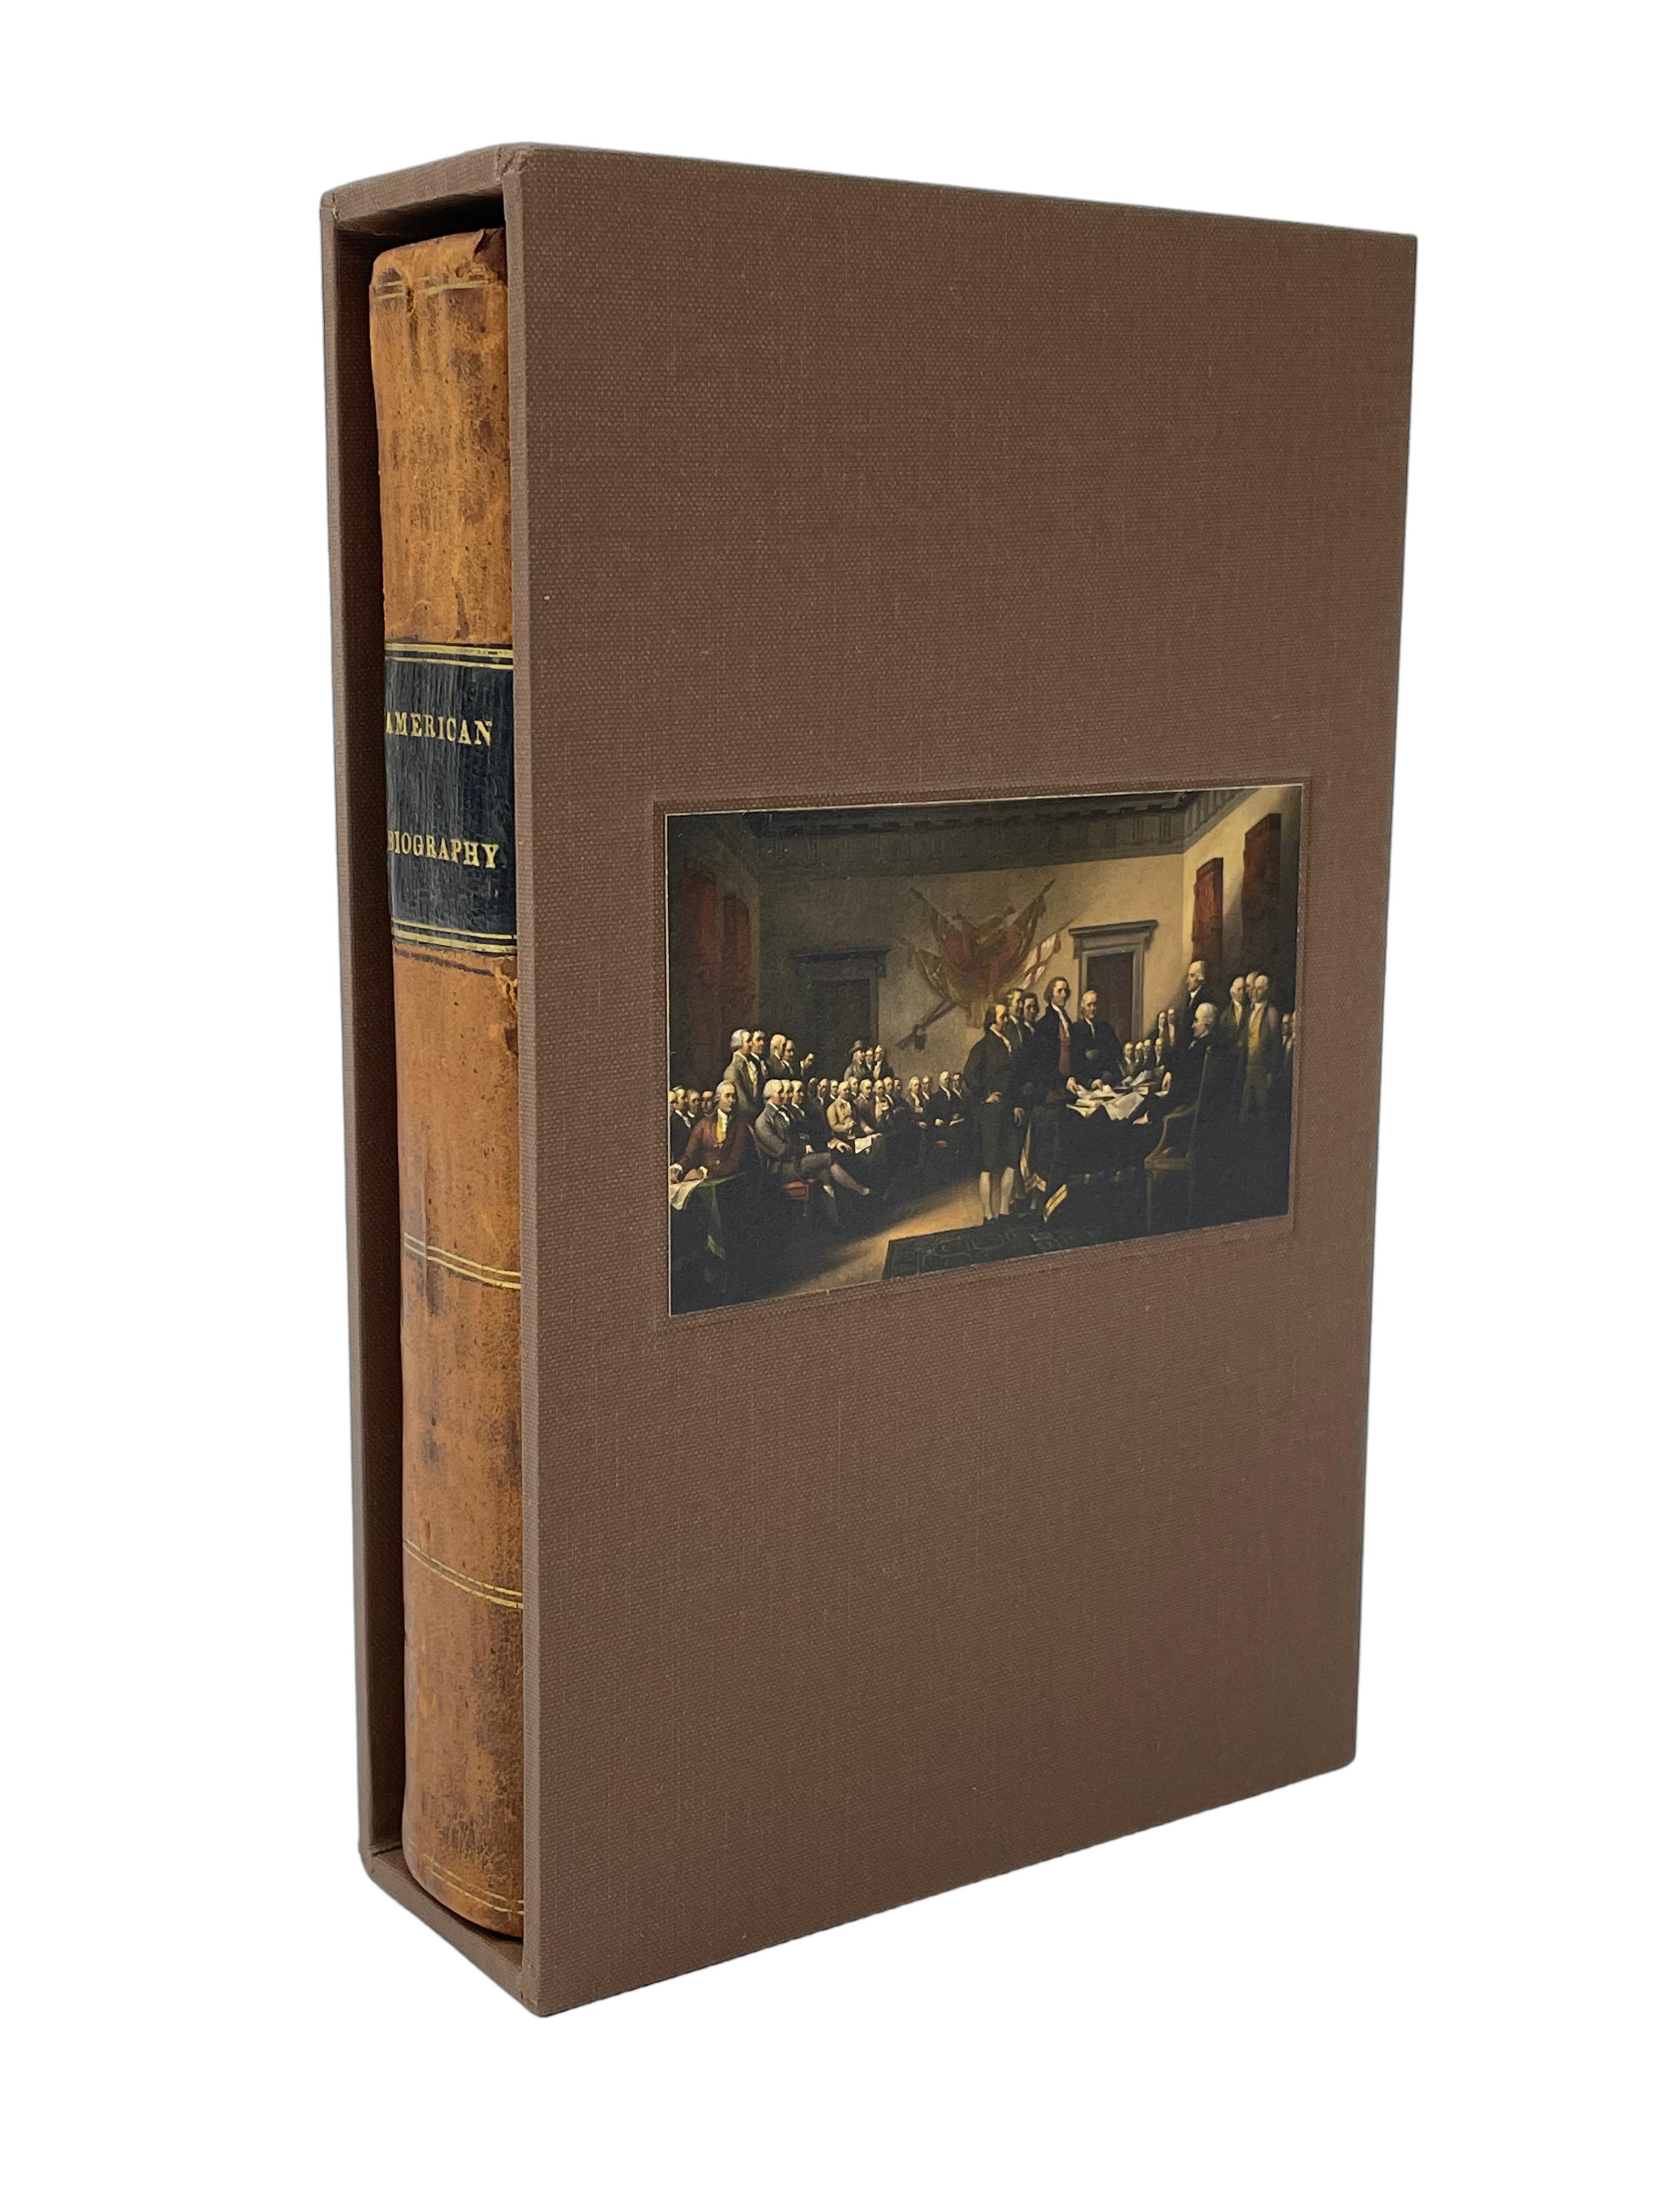 Goodrich, Charles. Lives of the SIgners of the Declaration of Independence. New York: William Reed & Co., 1829. 12mo. Presented in its original leather boards with a new archival cloth slipcase. 

Presented is an early printing of Rev. Charles